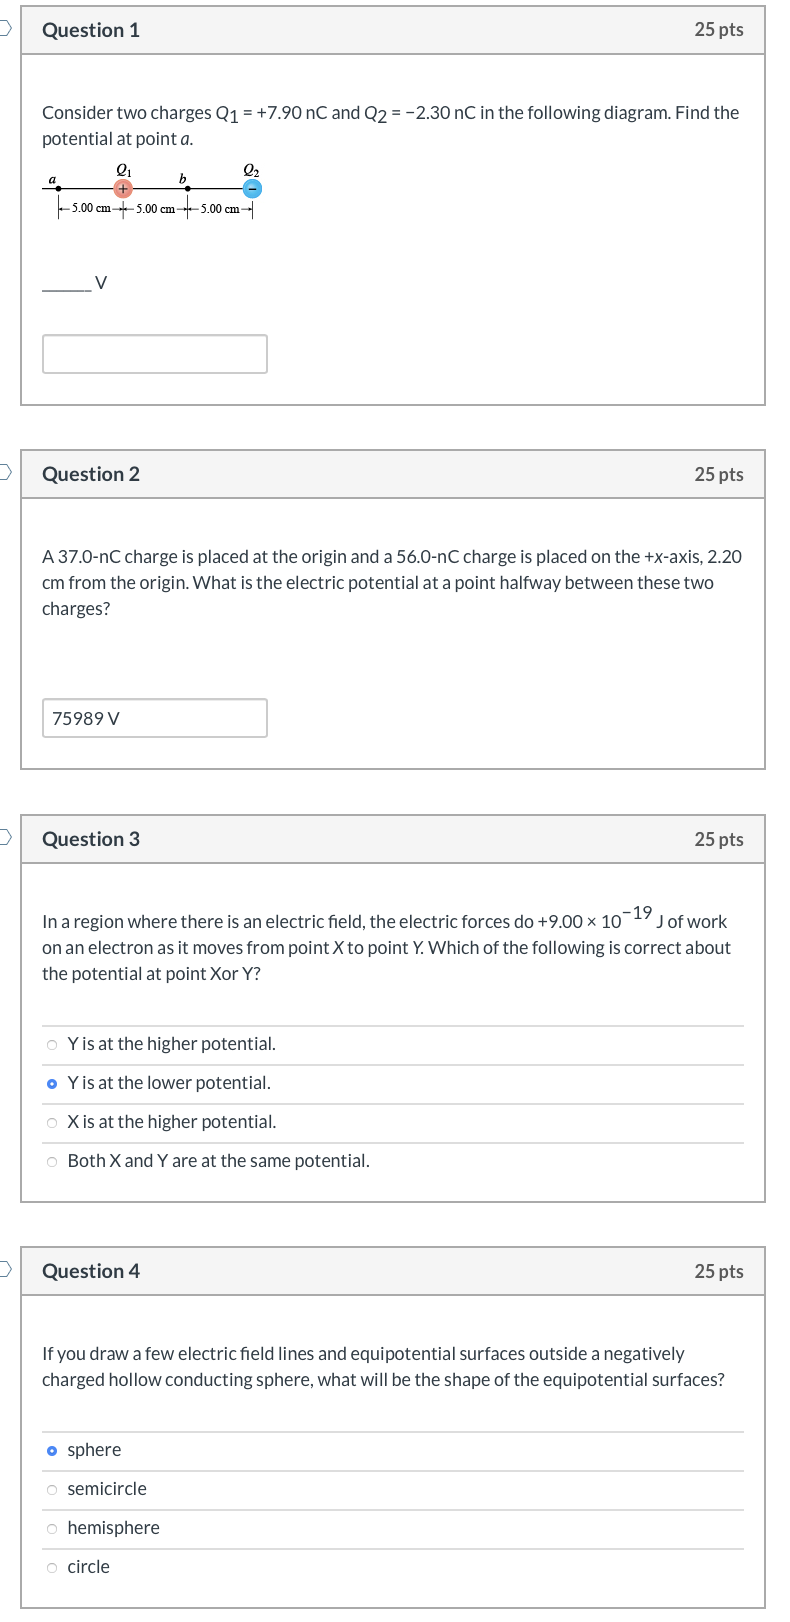 Solved Consider two charges q1=−43e and q2=20e at positions